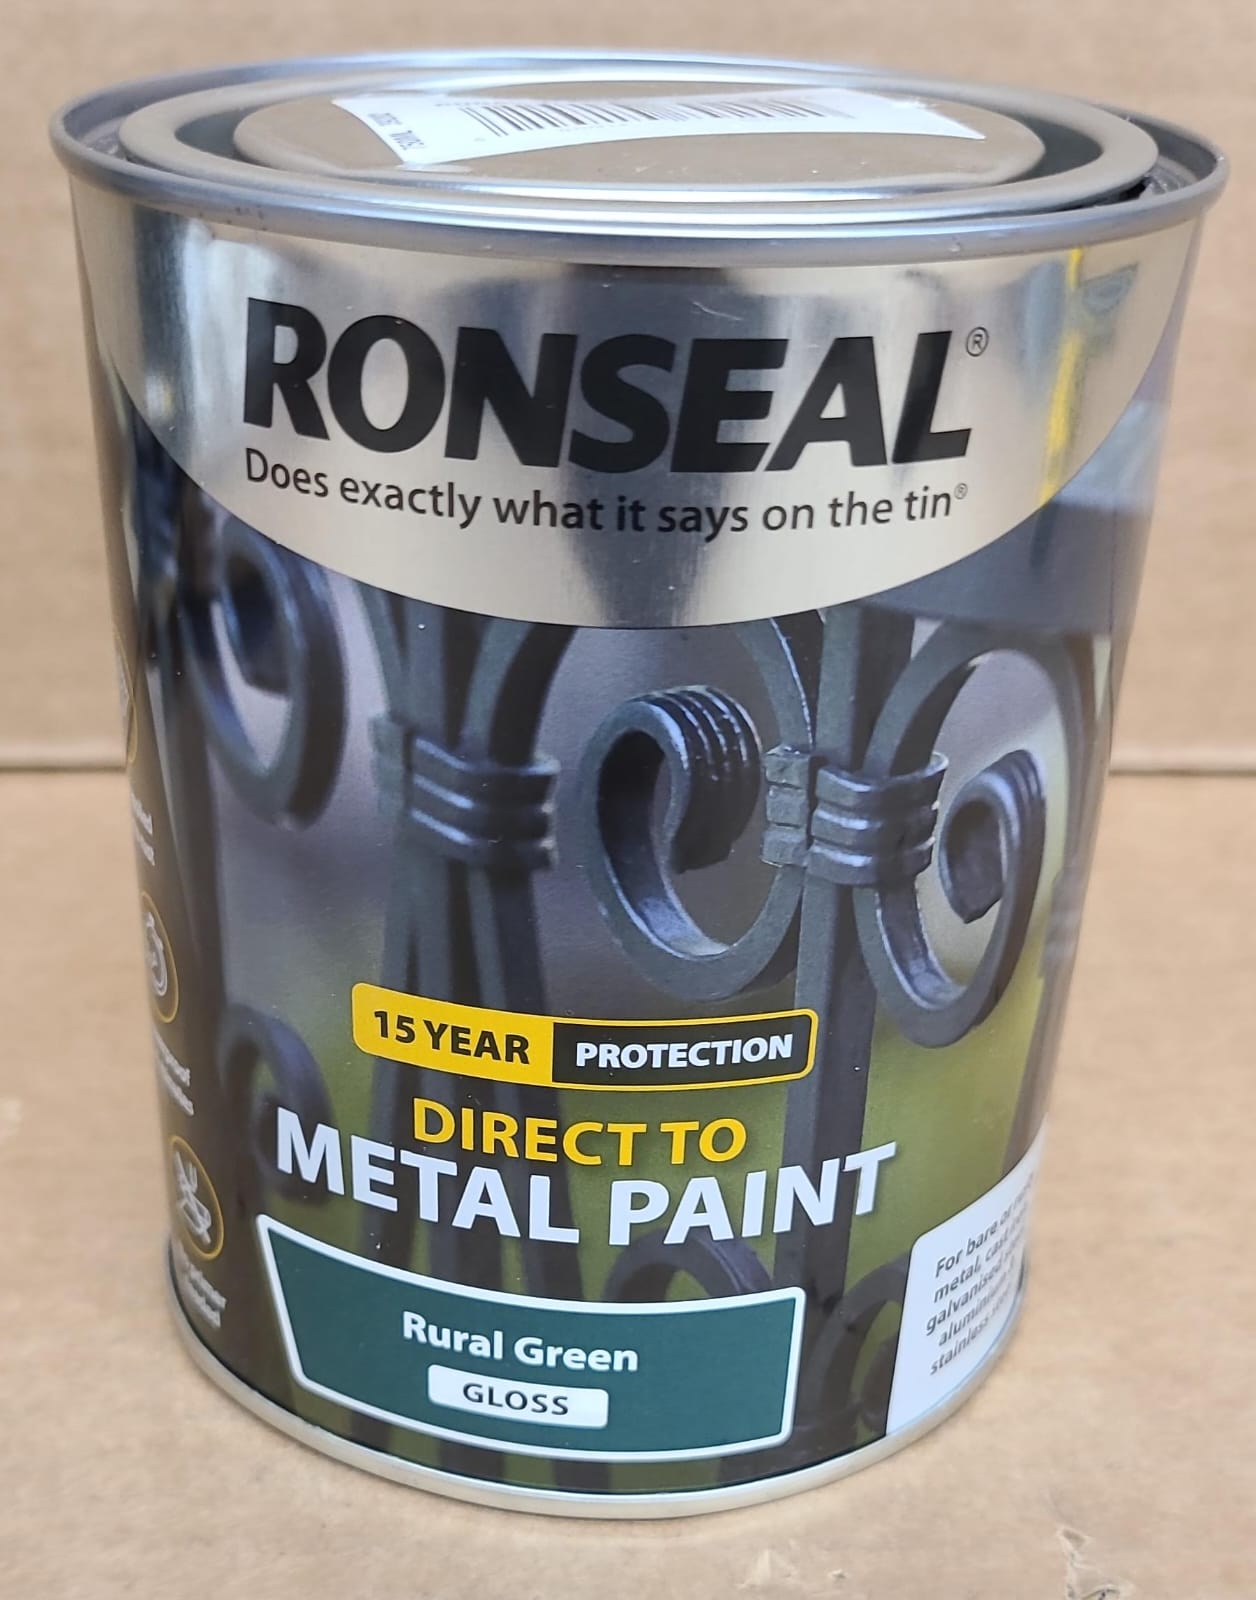 Ronseal 15 Year Direct To Metal Paint - Gloss - Rural Green - 750ml - 2020